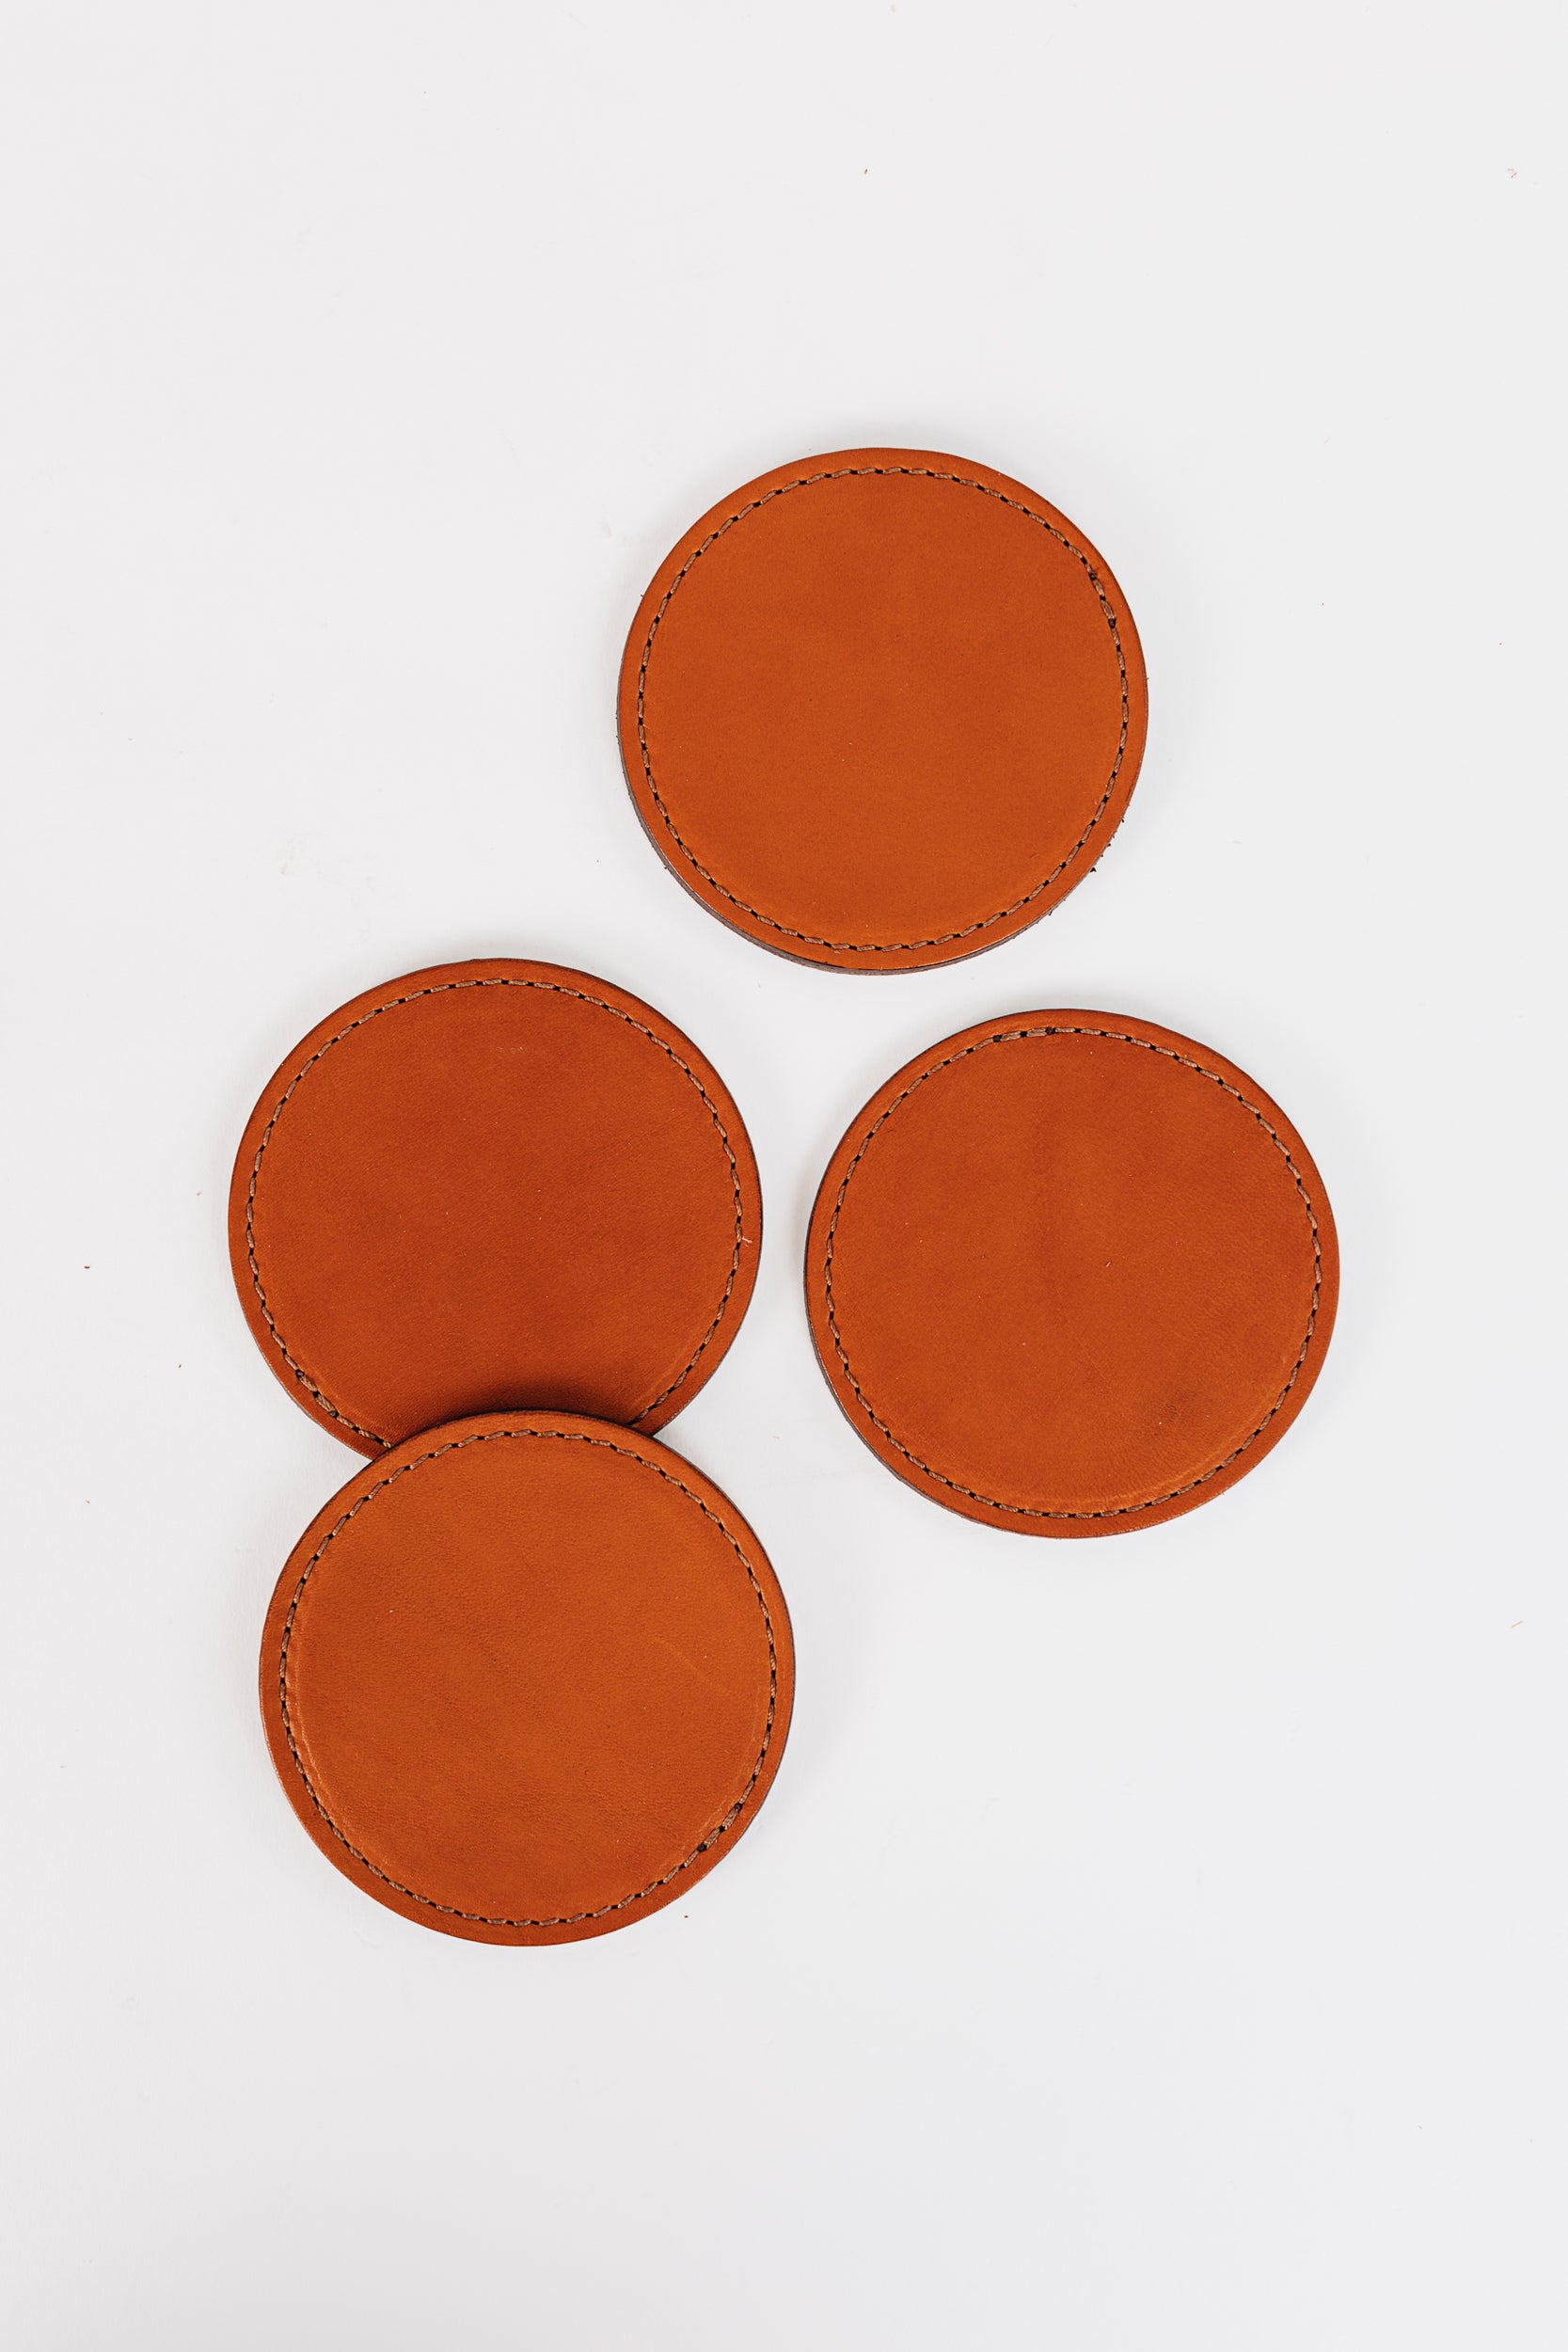 The Leather Coasters - Set of 4